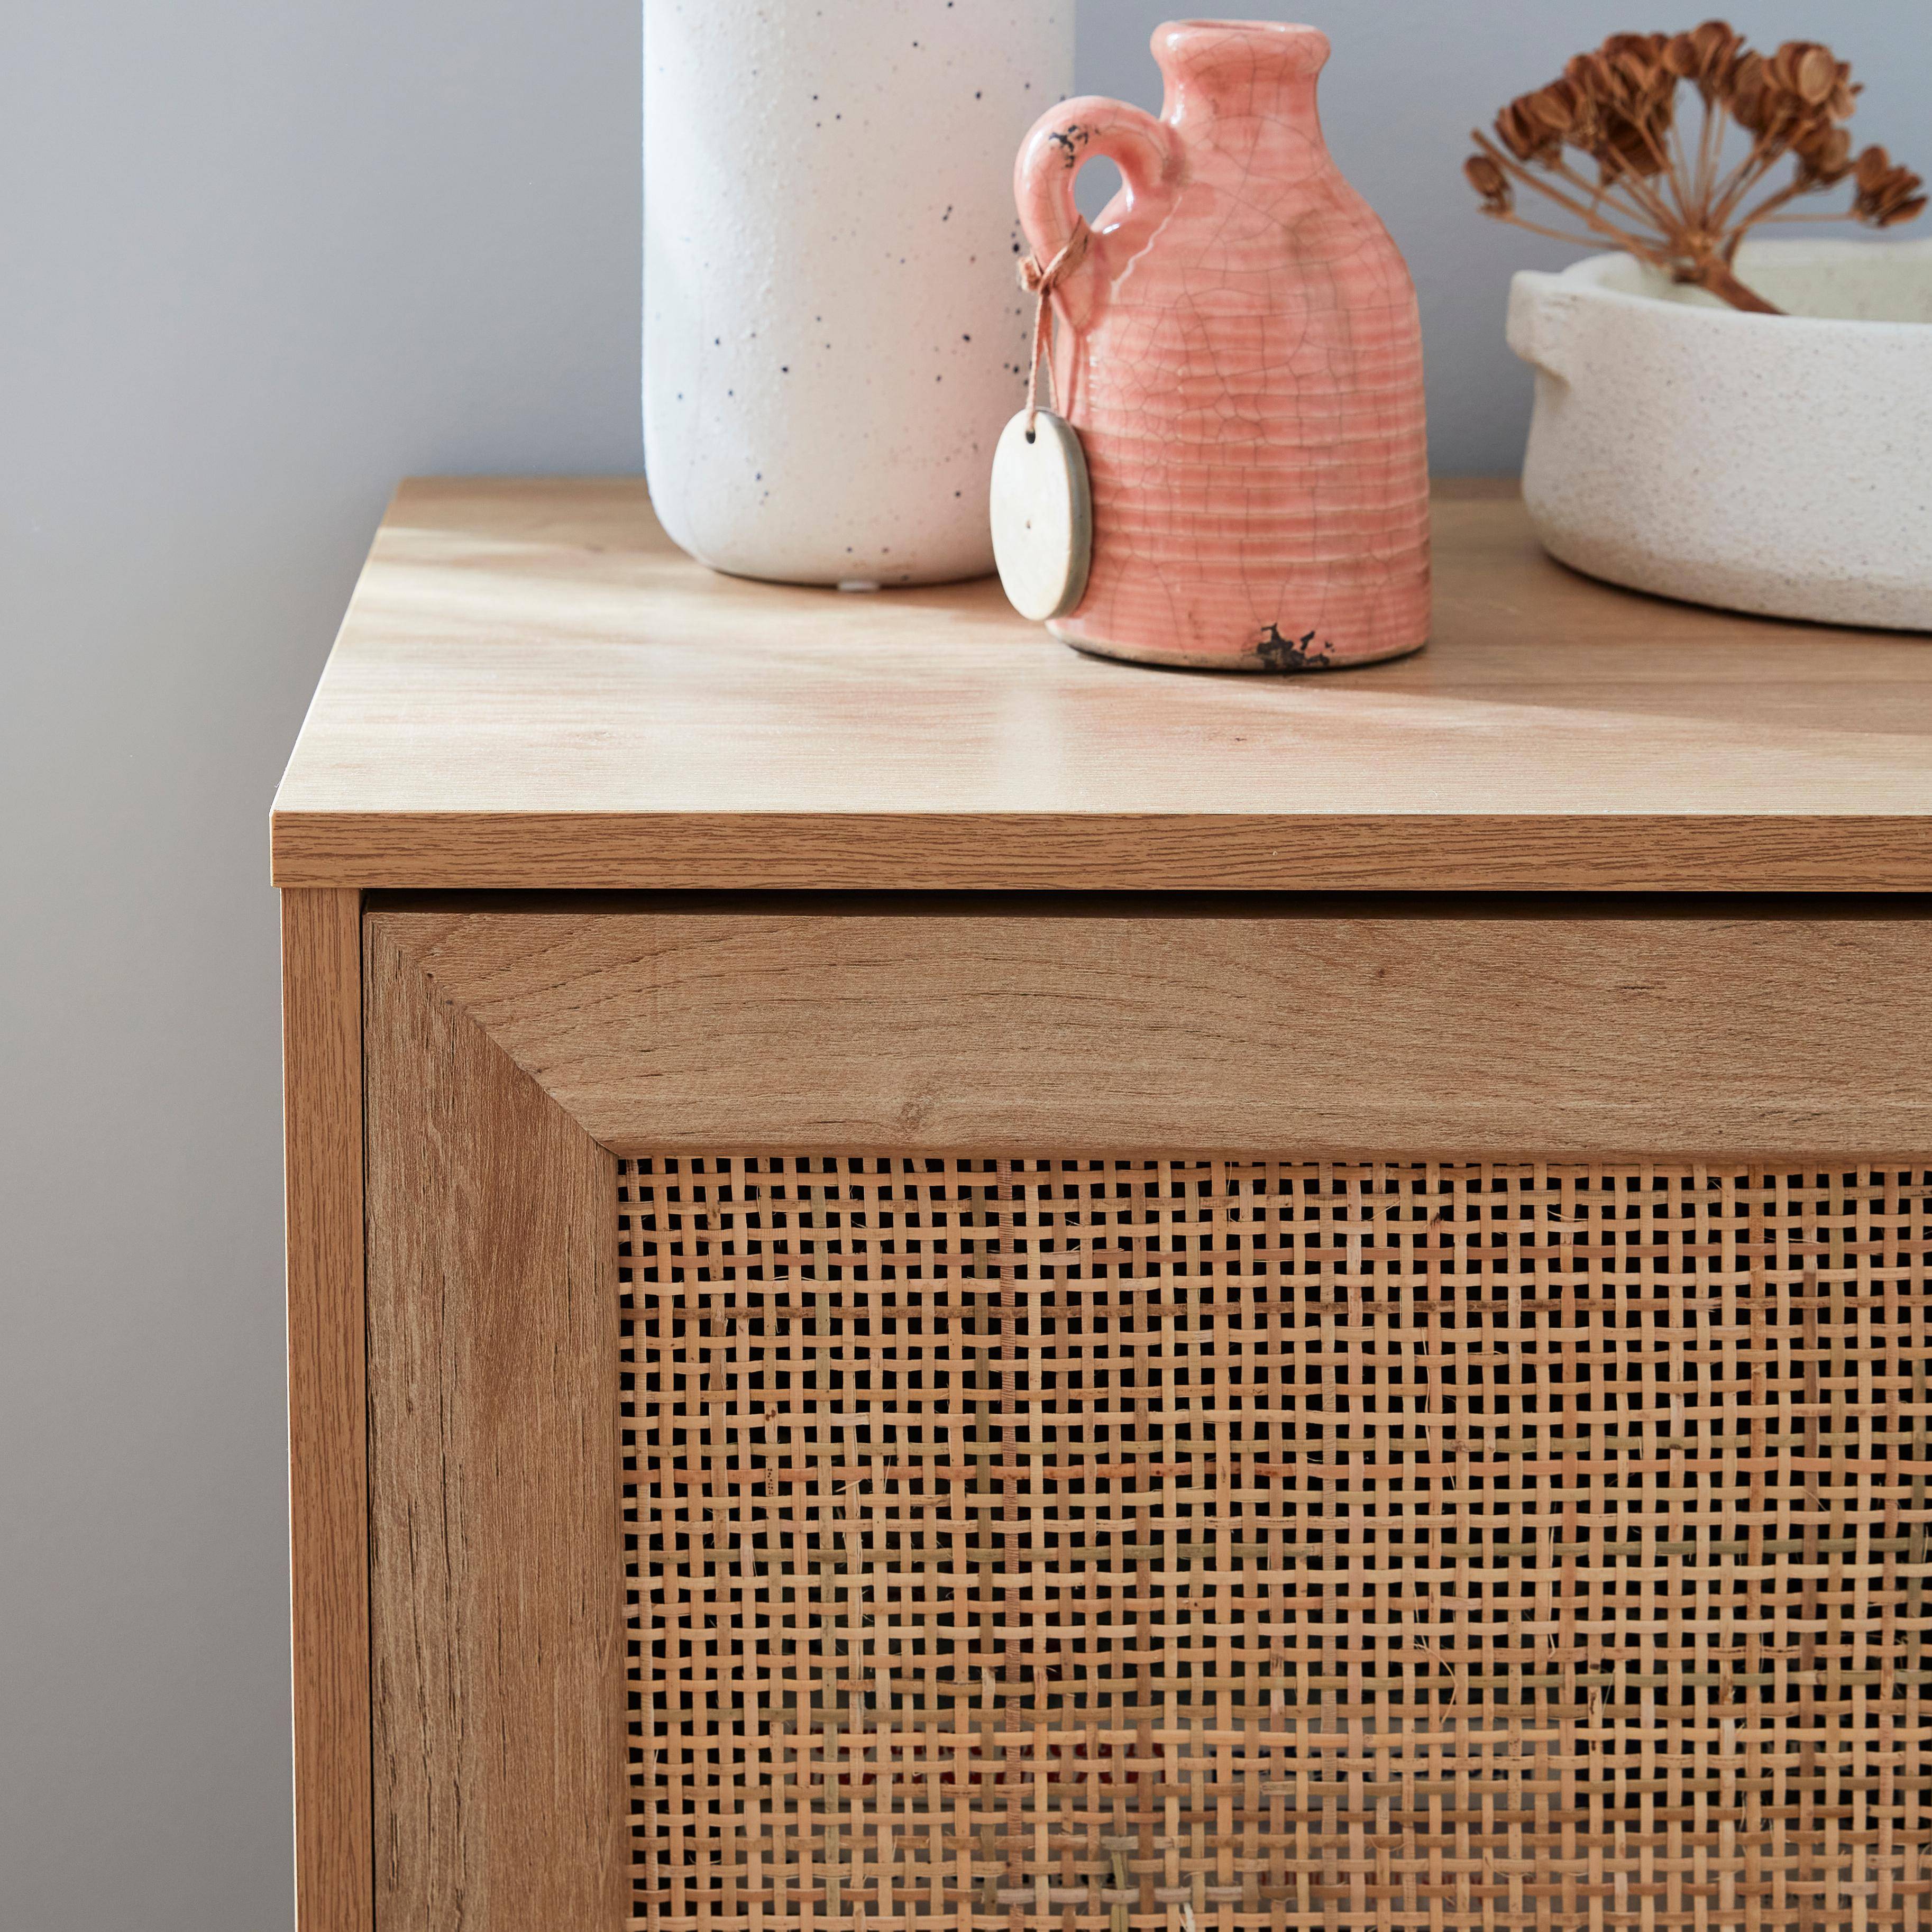 Wooden and cane rattan detail storage cabinet with 2 shelves, 1 cupboard, Scandi-style legs, 80x39x65.8cm - Boheme - Natural wood colour Photo2